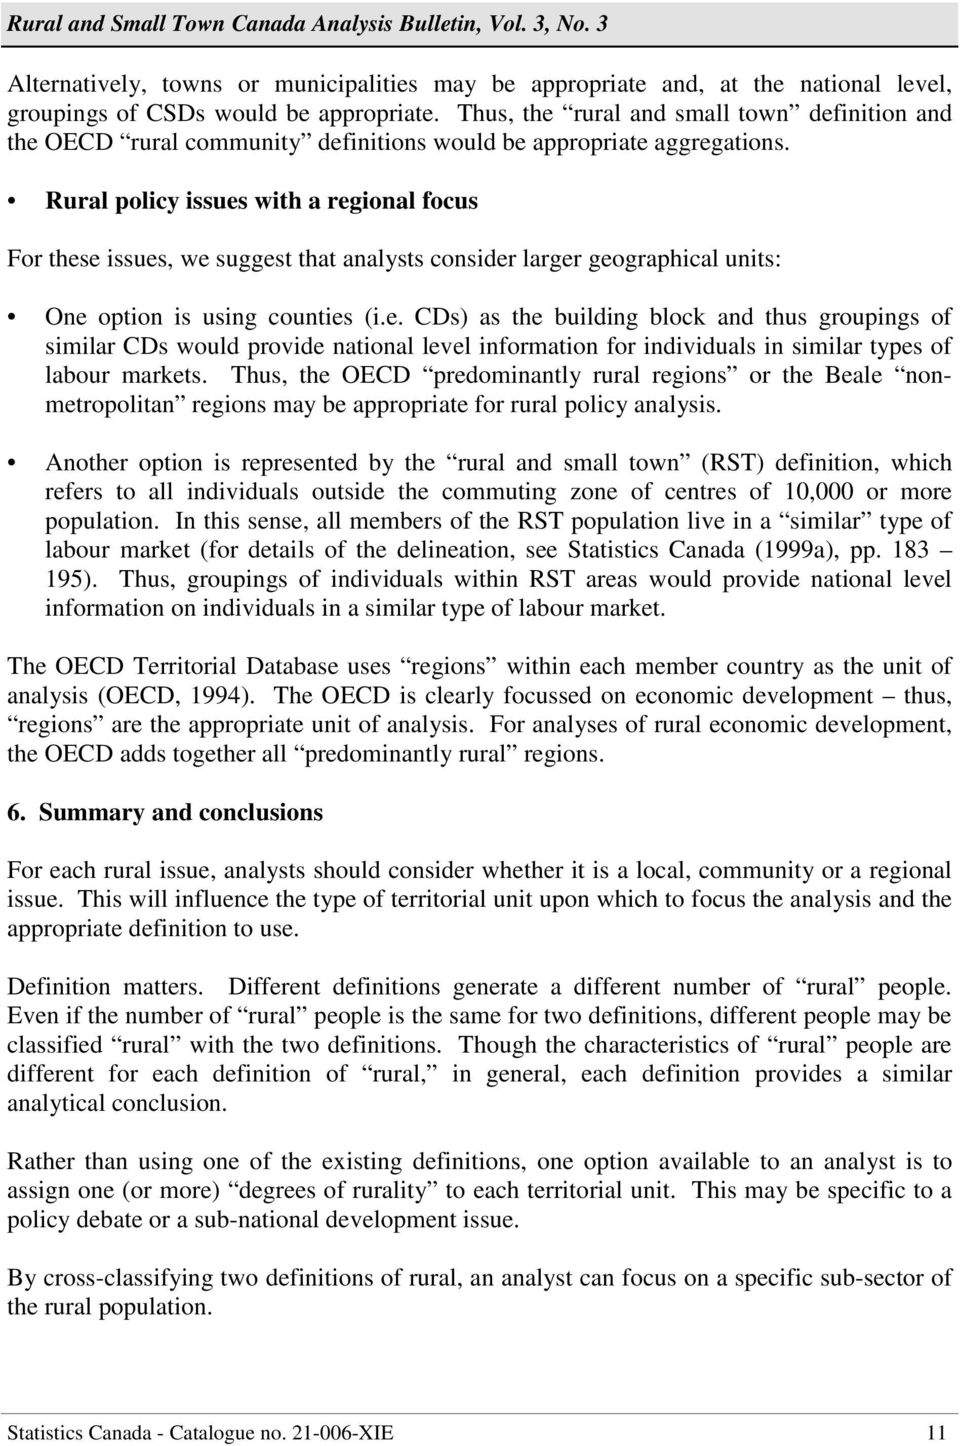 Rural And Small Town Canada Analysis Bulletin Catalogue No Xie Vol 3 No 3 November 2001 Pdf Free Download,What Does Complete Color Blindness Look Like